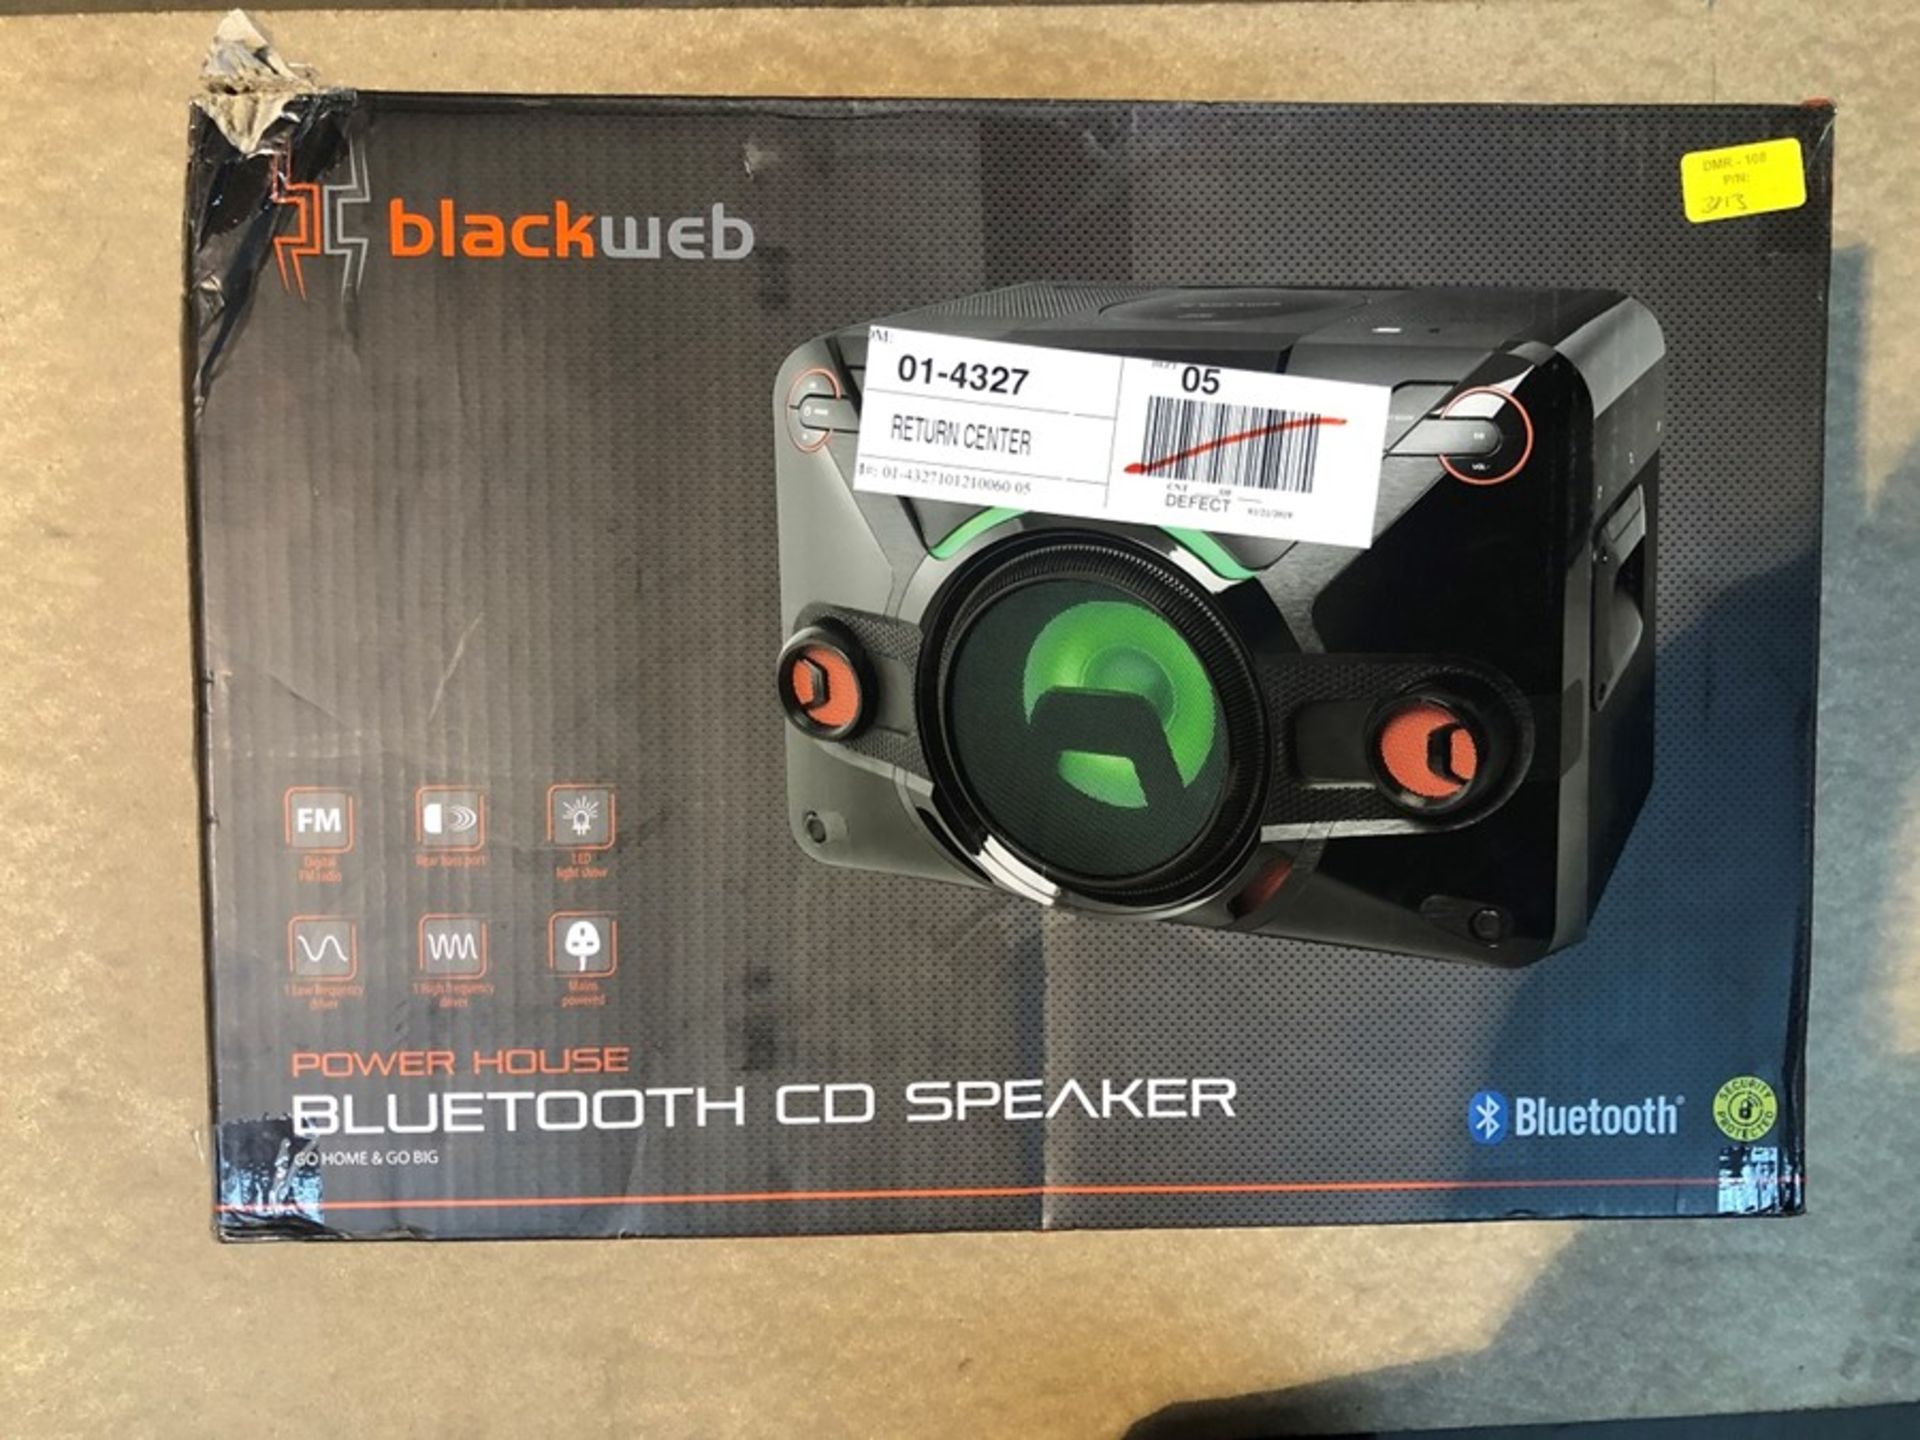 1 BOXED BLACK WEB POWER HOUSE BLUETOOTH CD SPEAKER IN BLACK / RRP £65.00 - BL -3813 (VIEWING